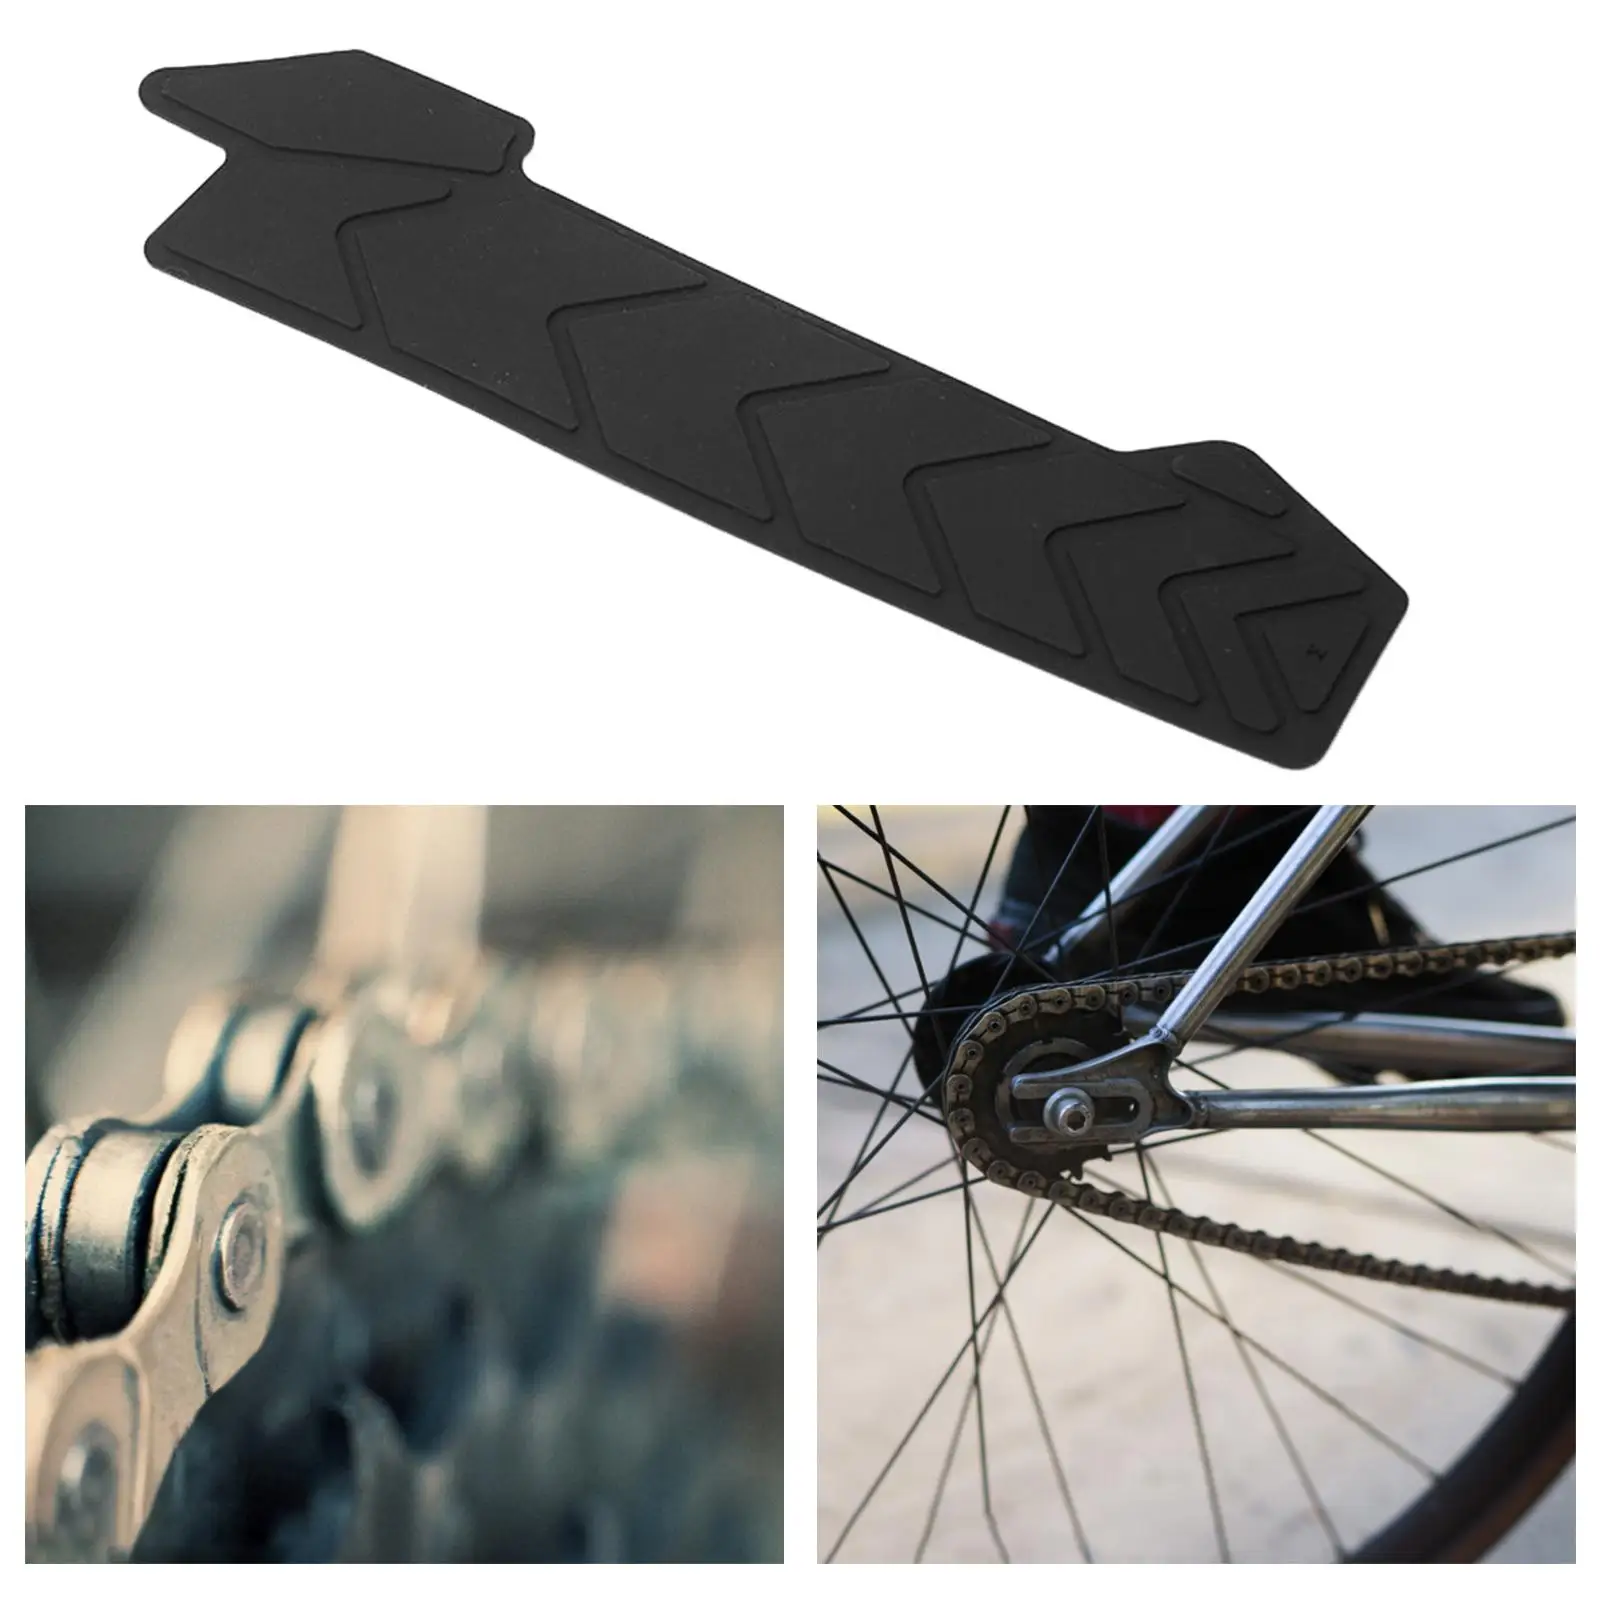 Bike Chainstay Protector Chain Pad Bicycle Frame Sticker Guard Pad for Road Bike